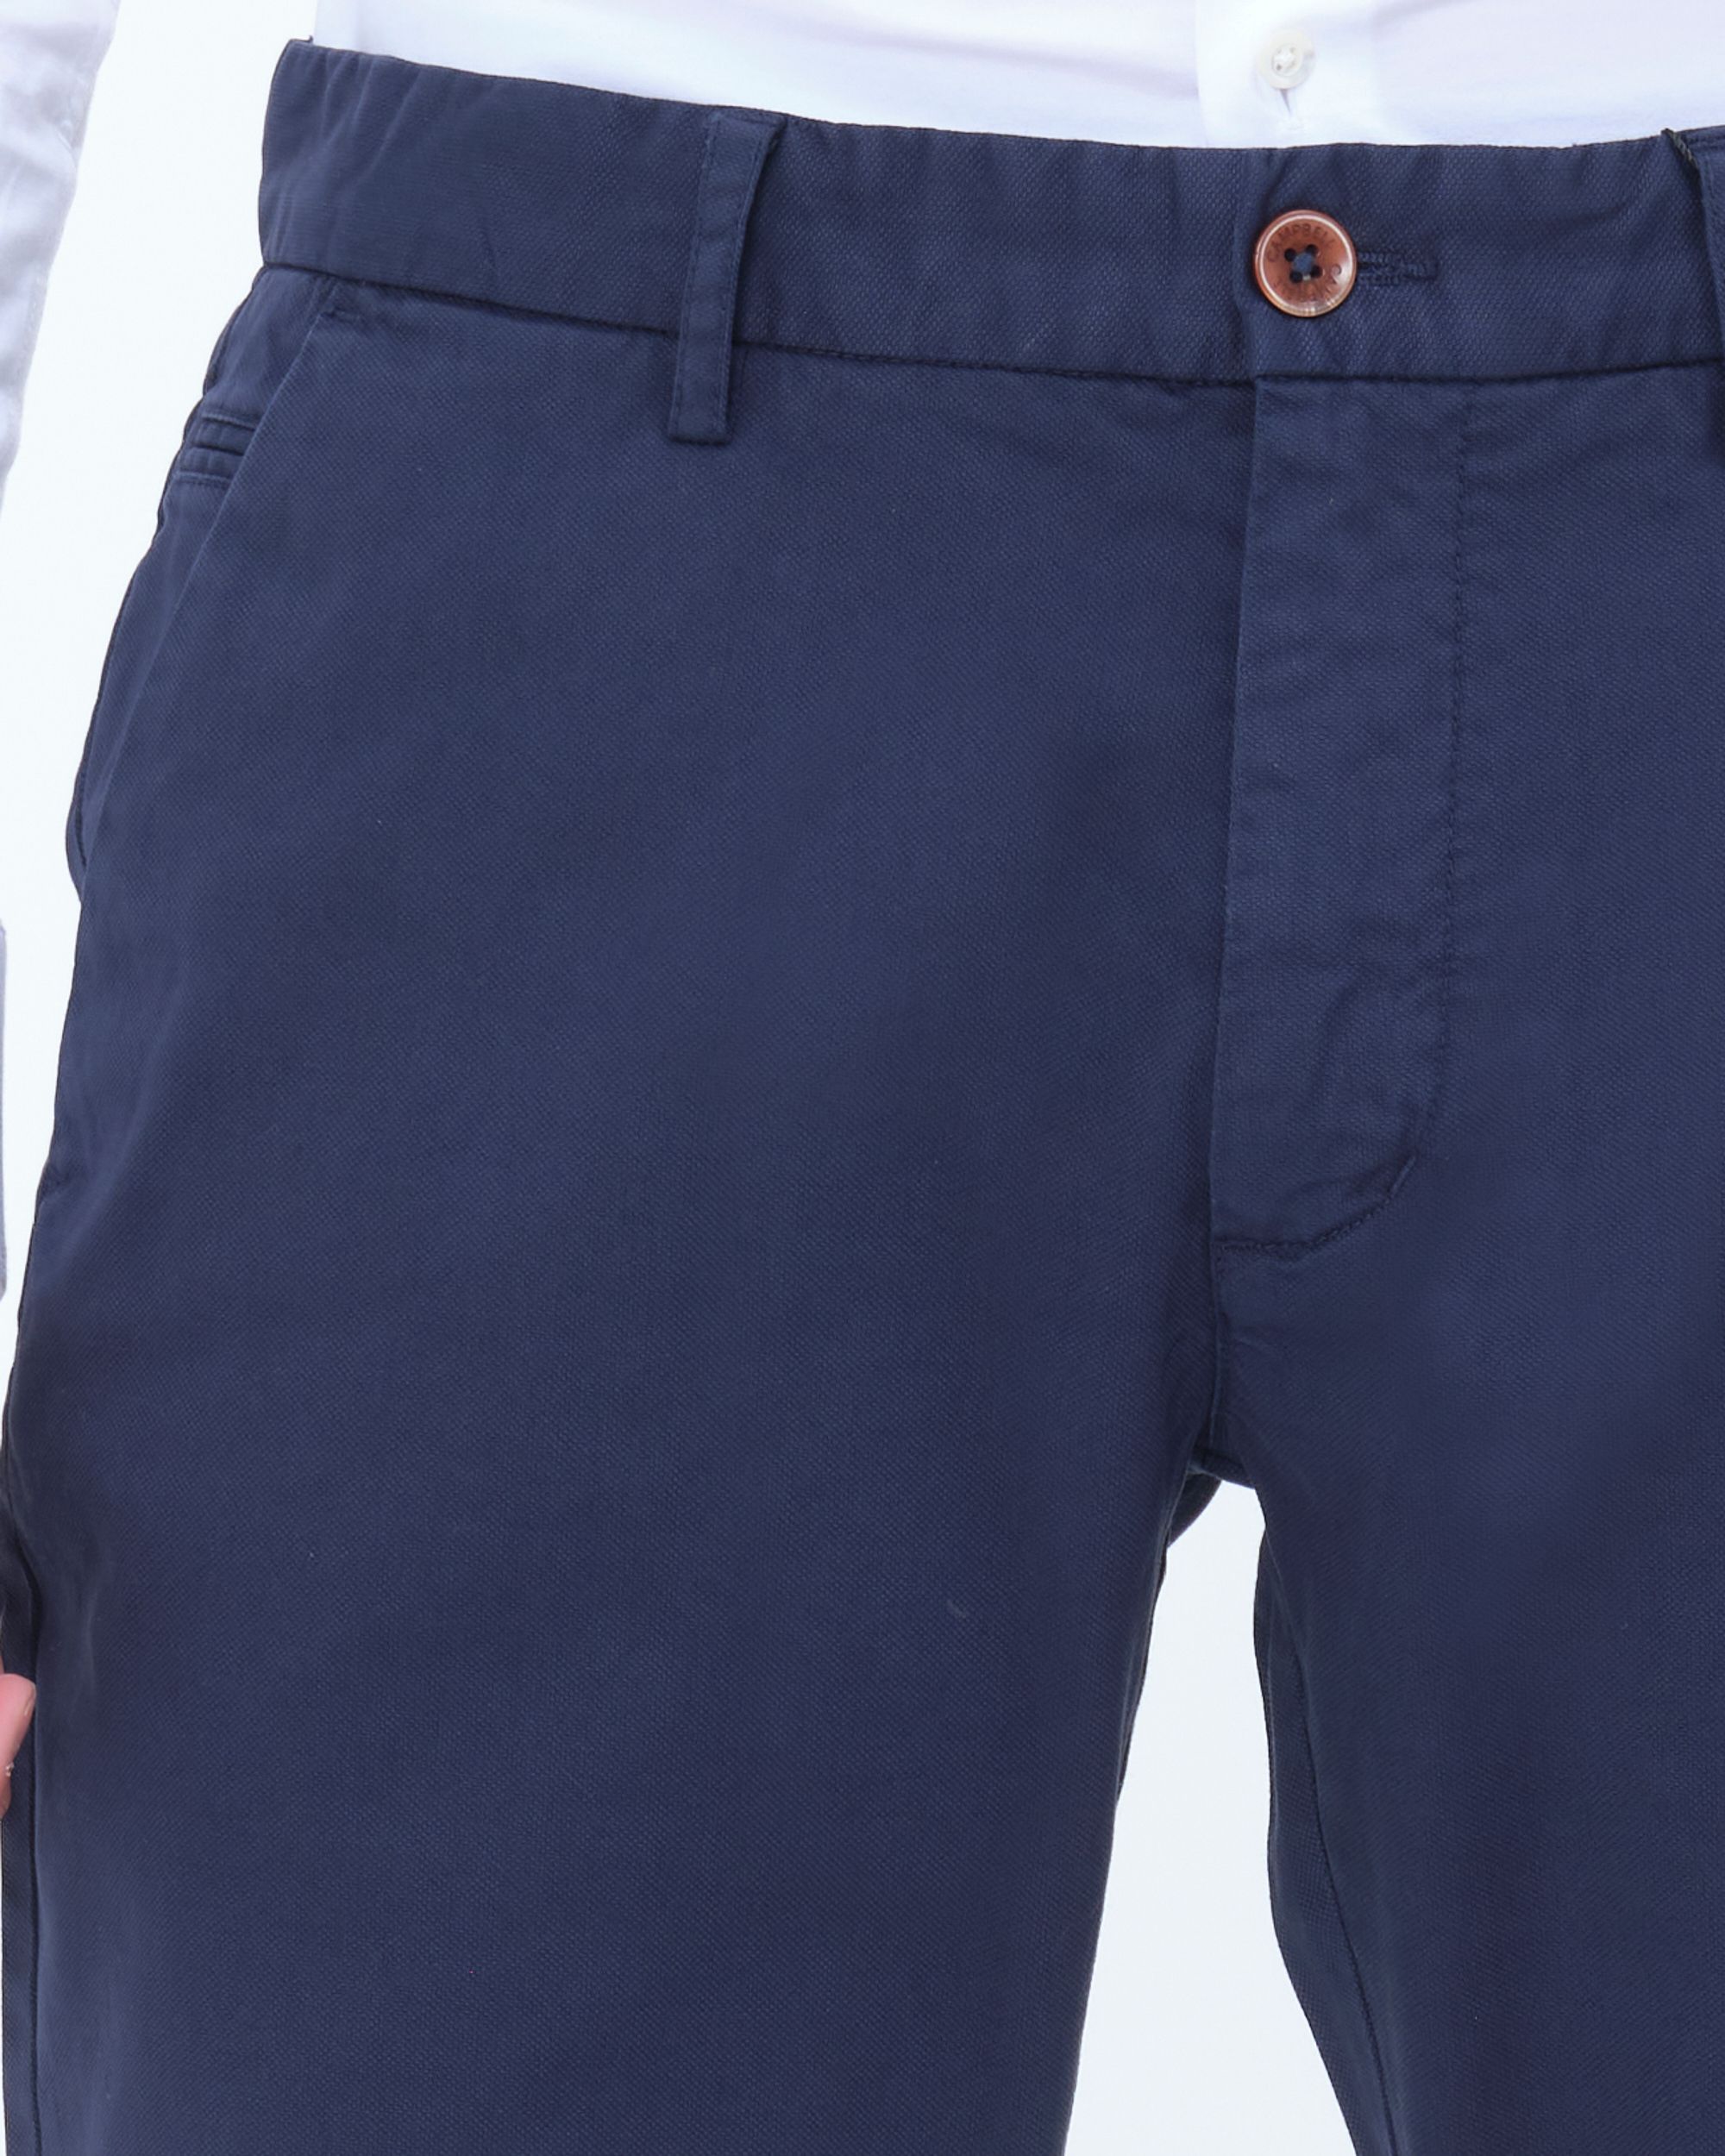 Campbell Classic Chino NAVY 081571-001-30/34